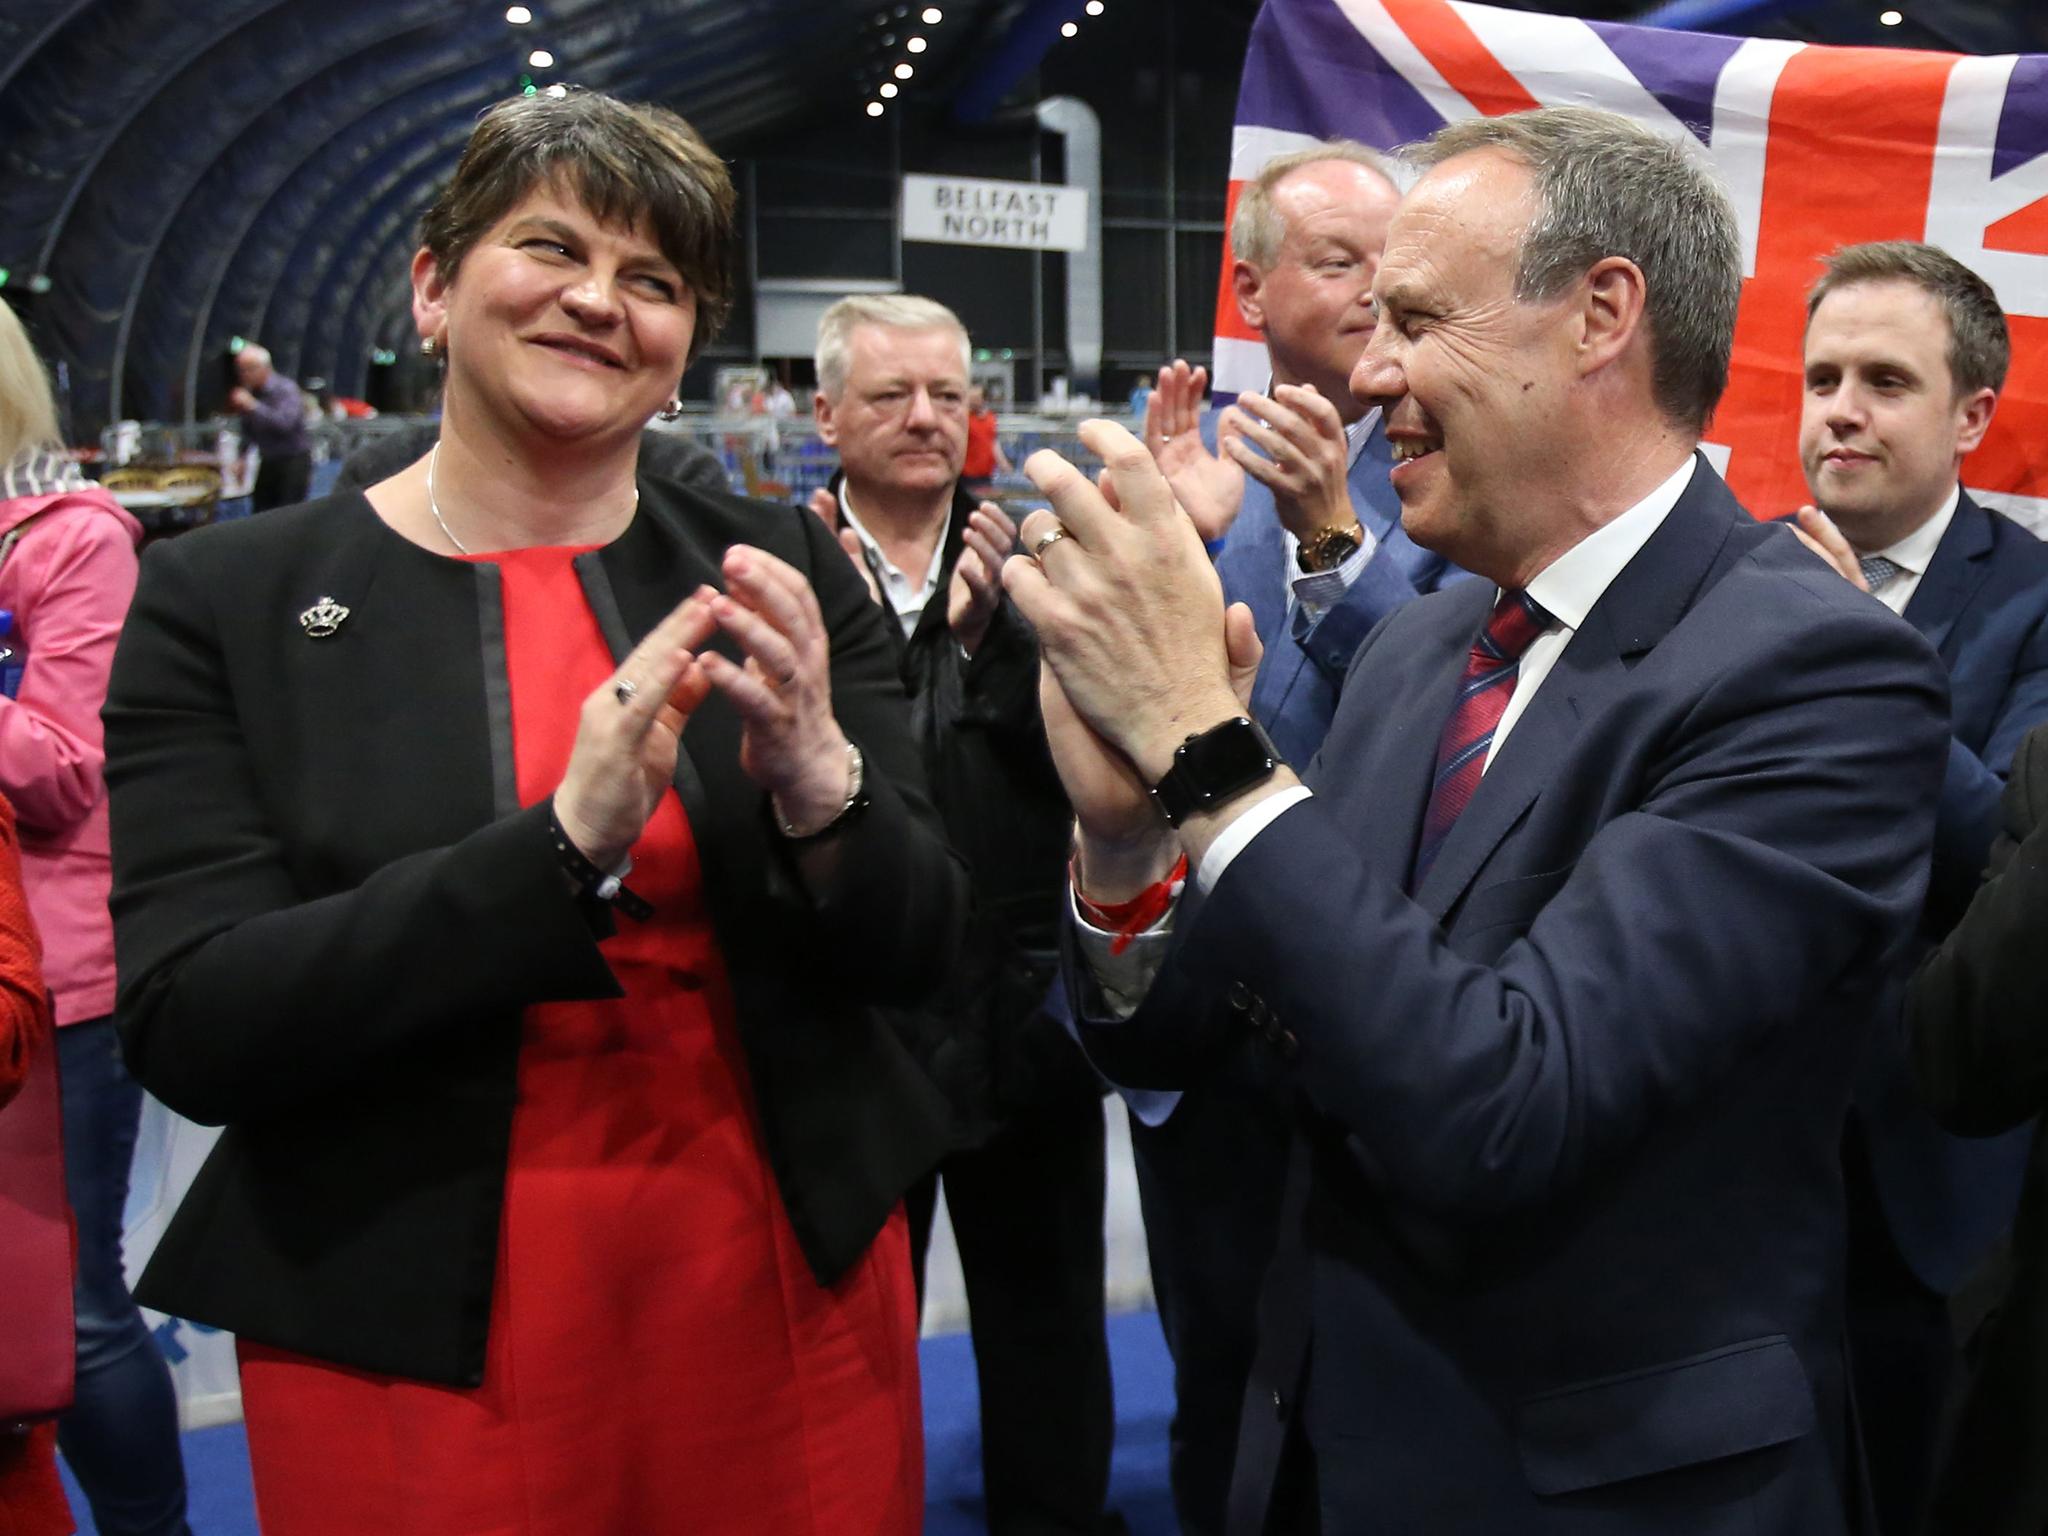 DUP leader Arlene Foster and deputy leader Nigel Dodds cheer as Emma Little Pengelly is elected to the South Belfast constituency at the Titanic exhibition centre in Belfast